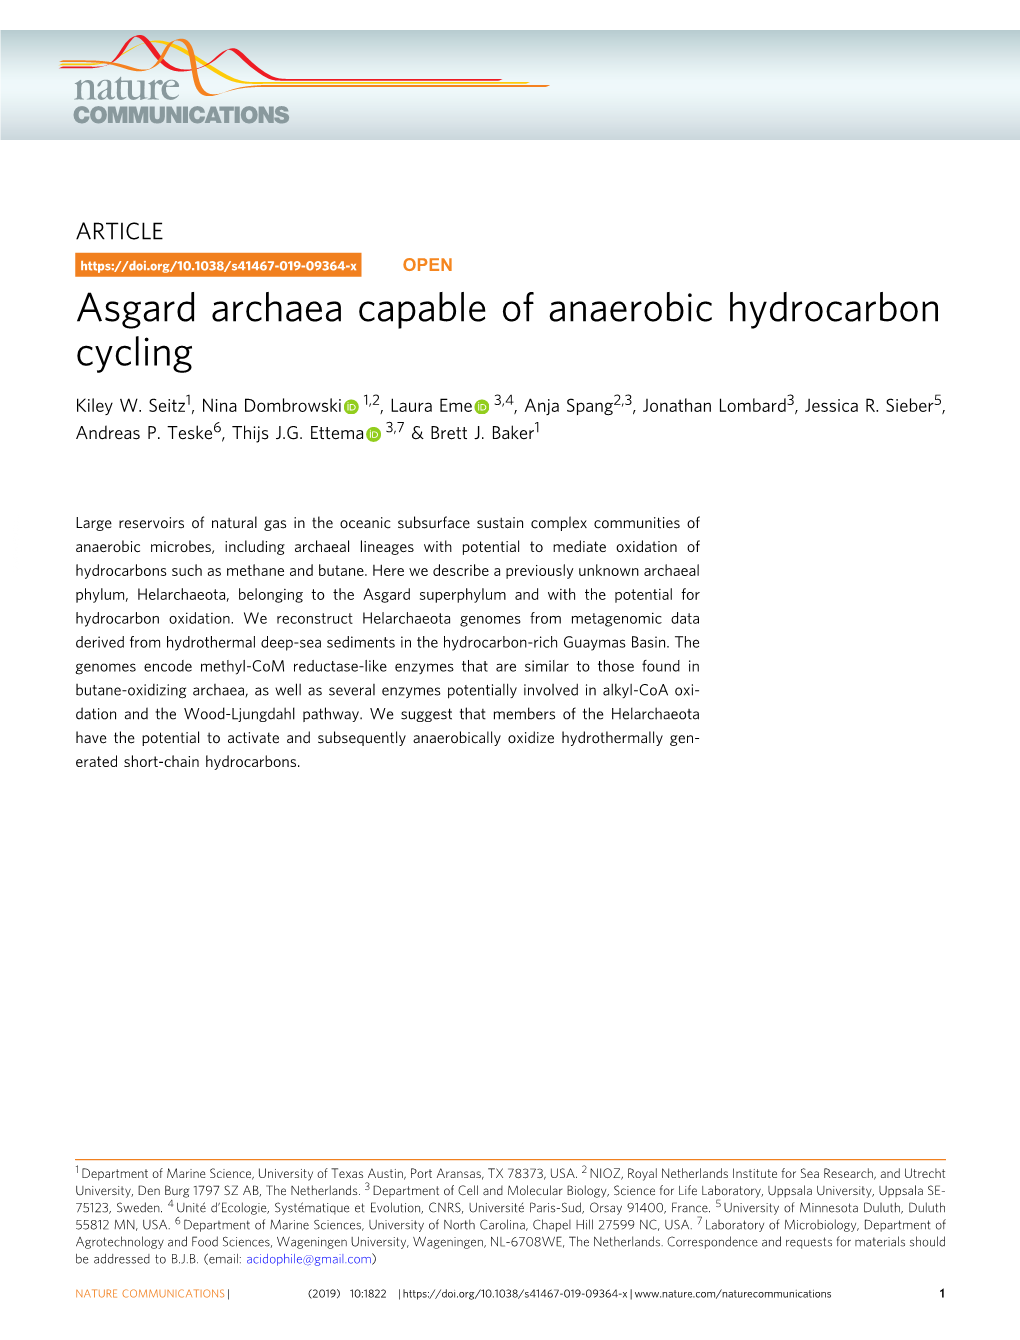 Asgard Archaea Capable of Anaerobic Hydrocarbon Cycling